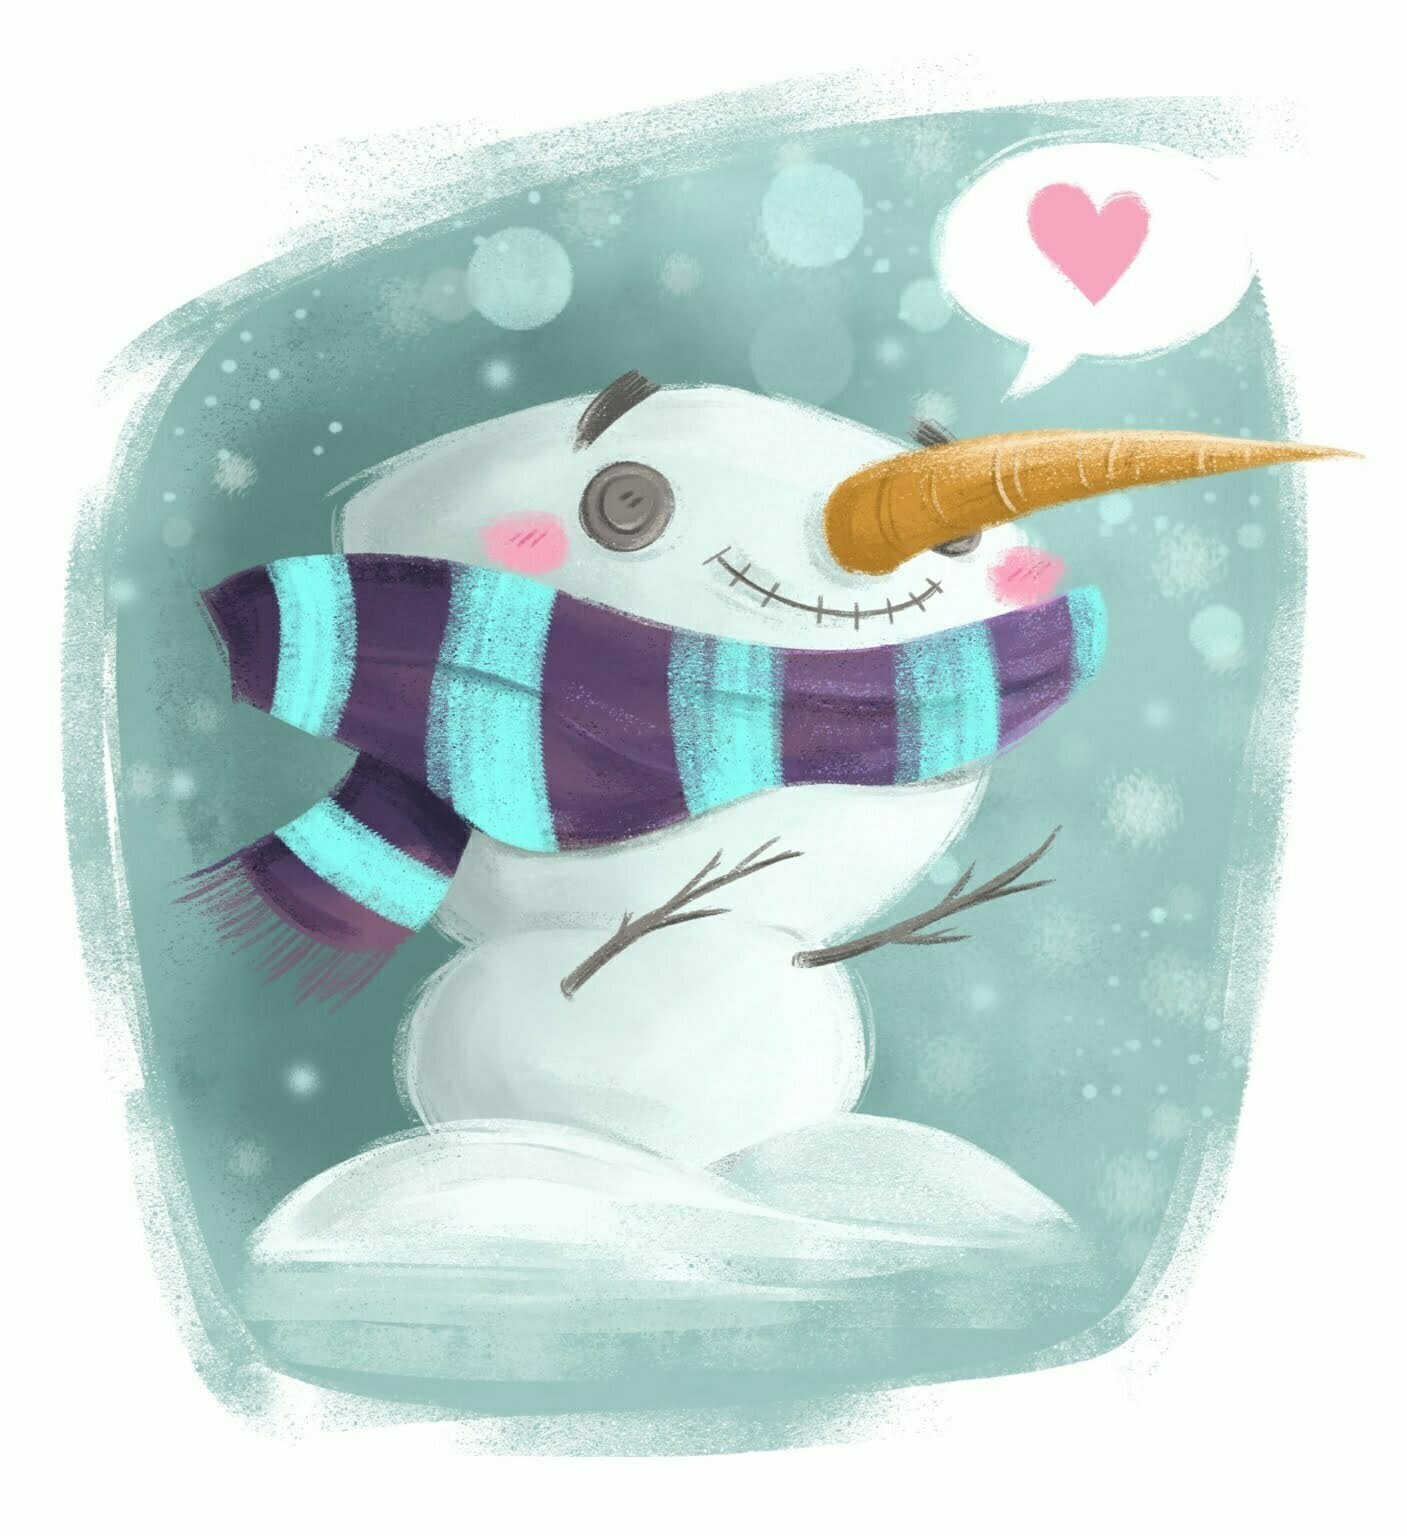 File:Snowman illustration.png - Wikimedia Commons